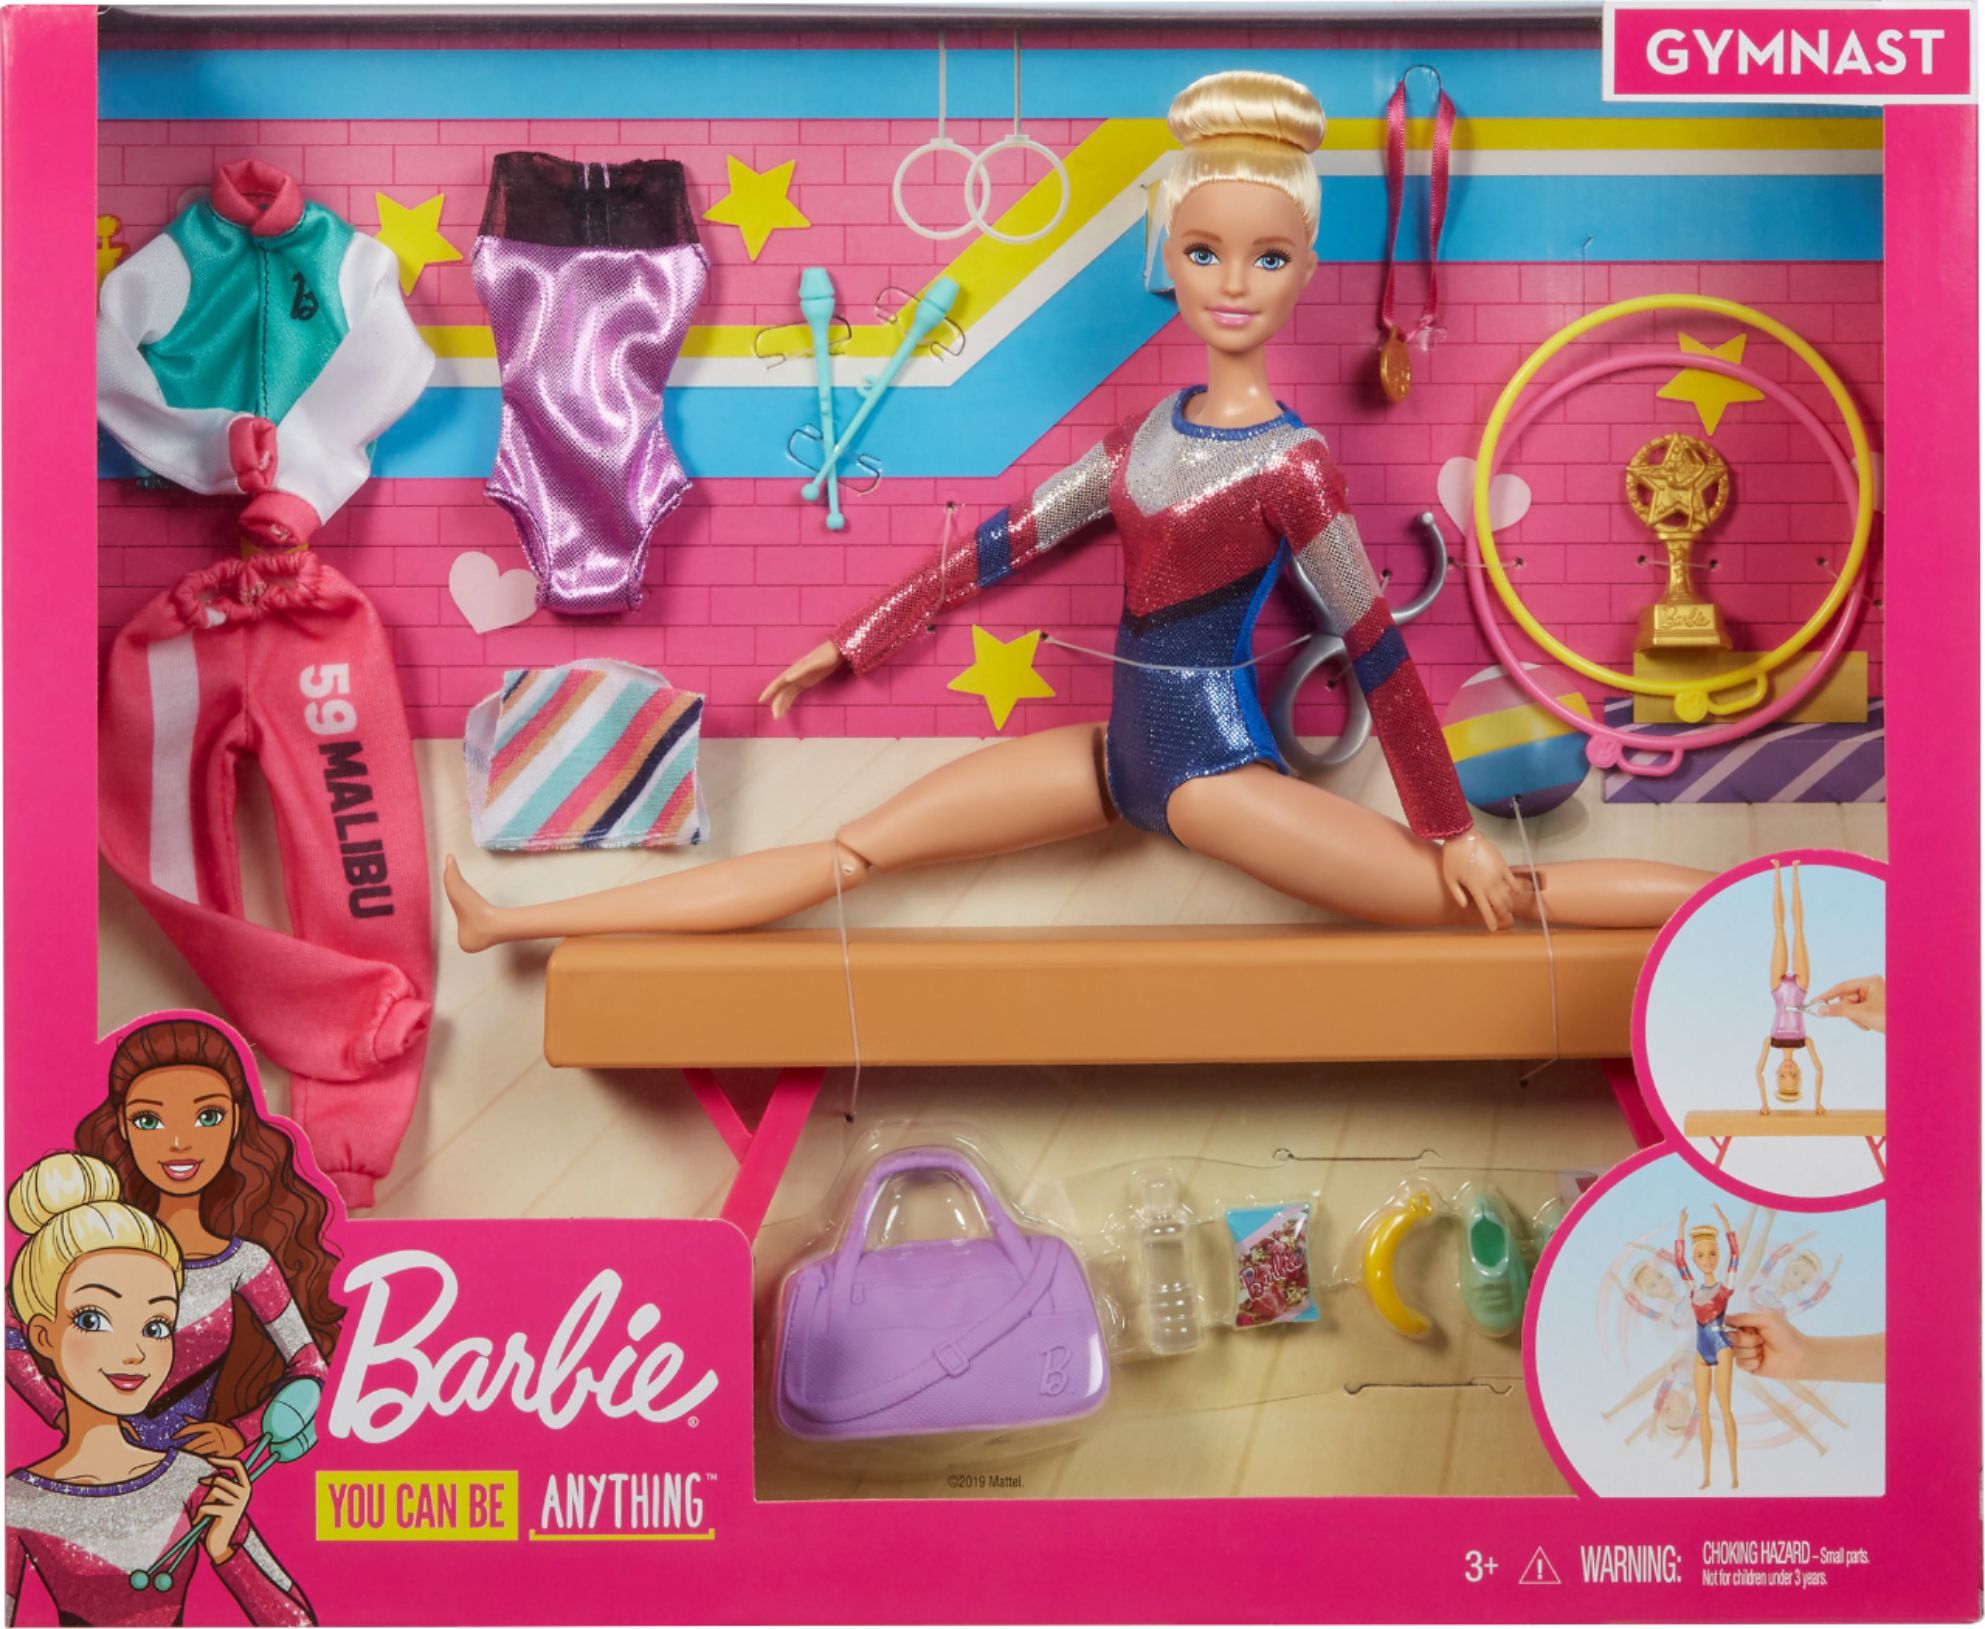 Barbie Gym Playset Gymnastics Accessories And Outfits Barbie Really Spins 